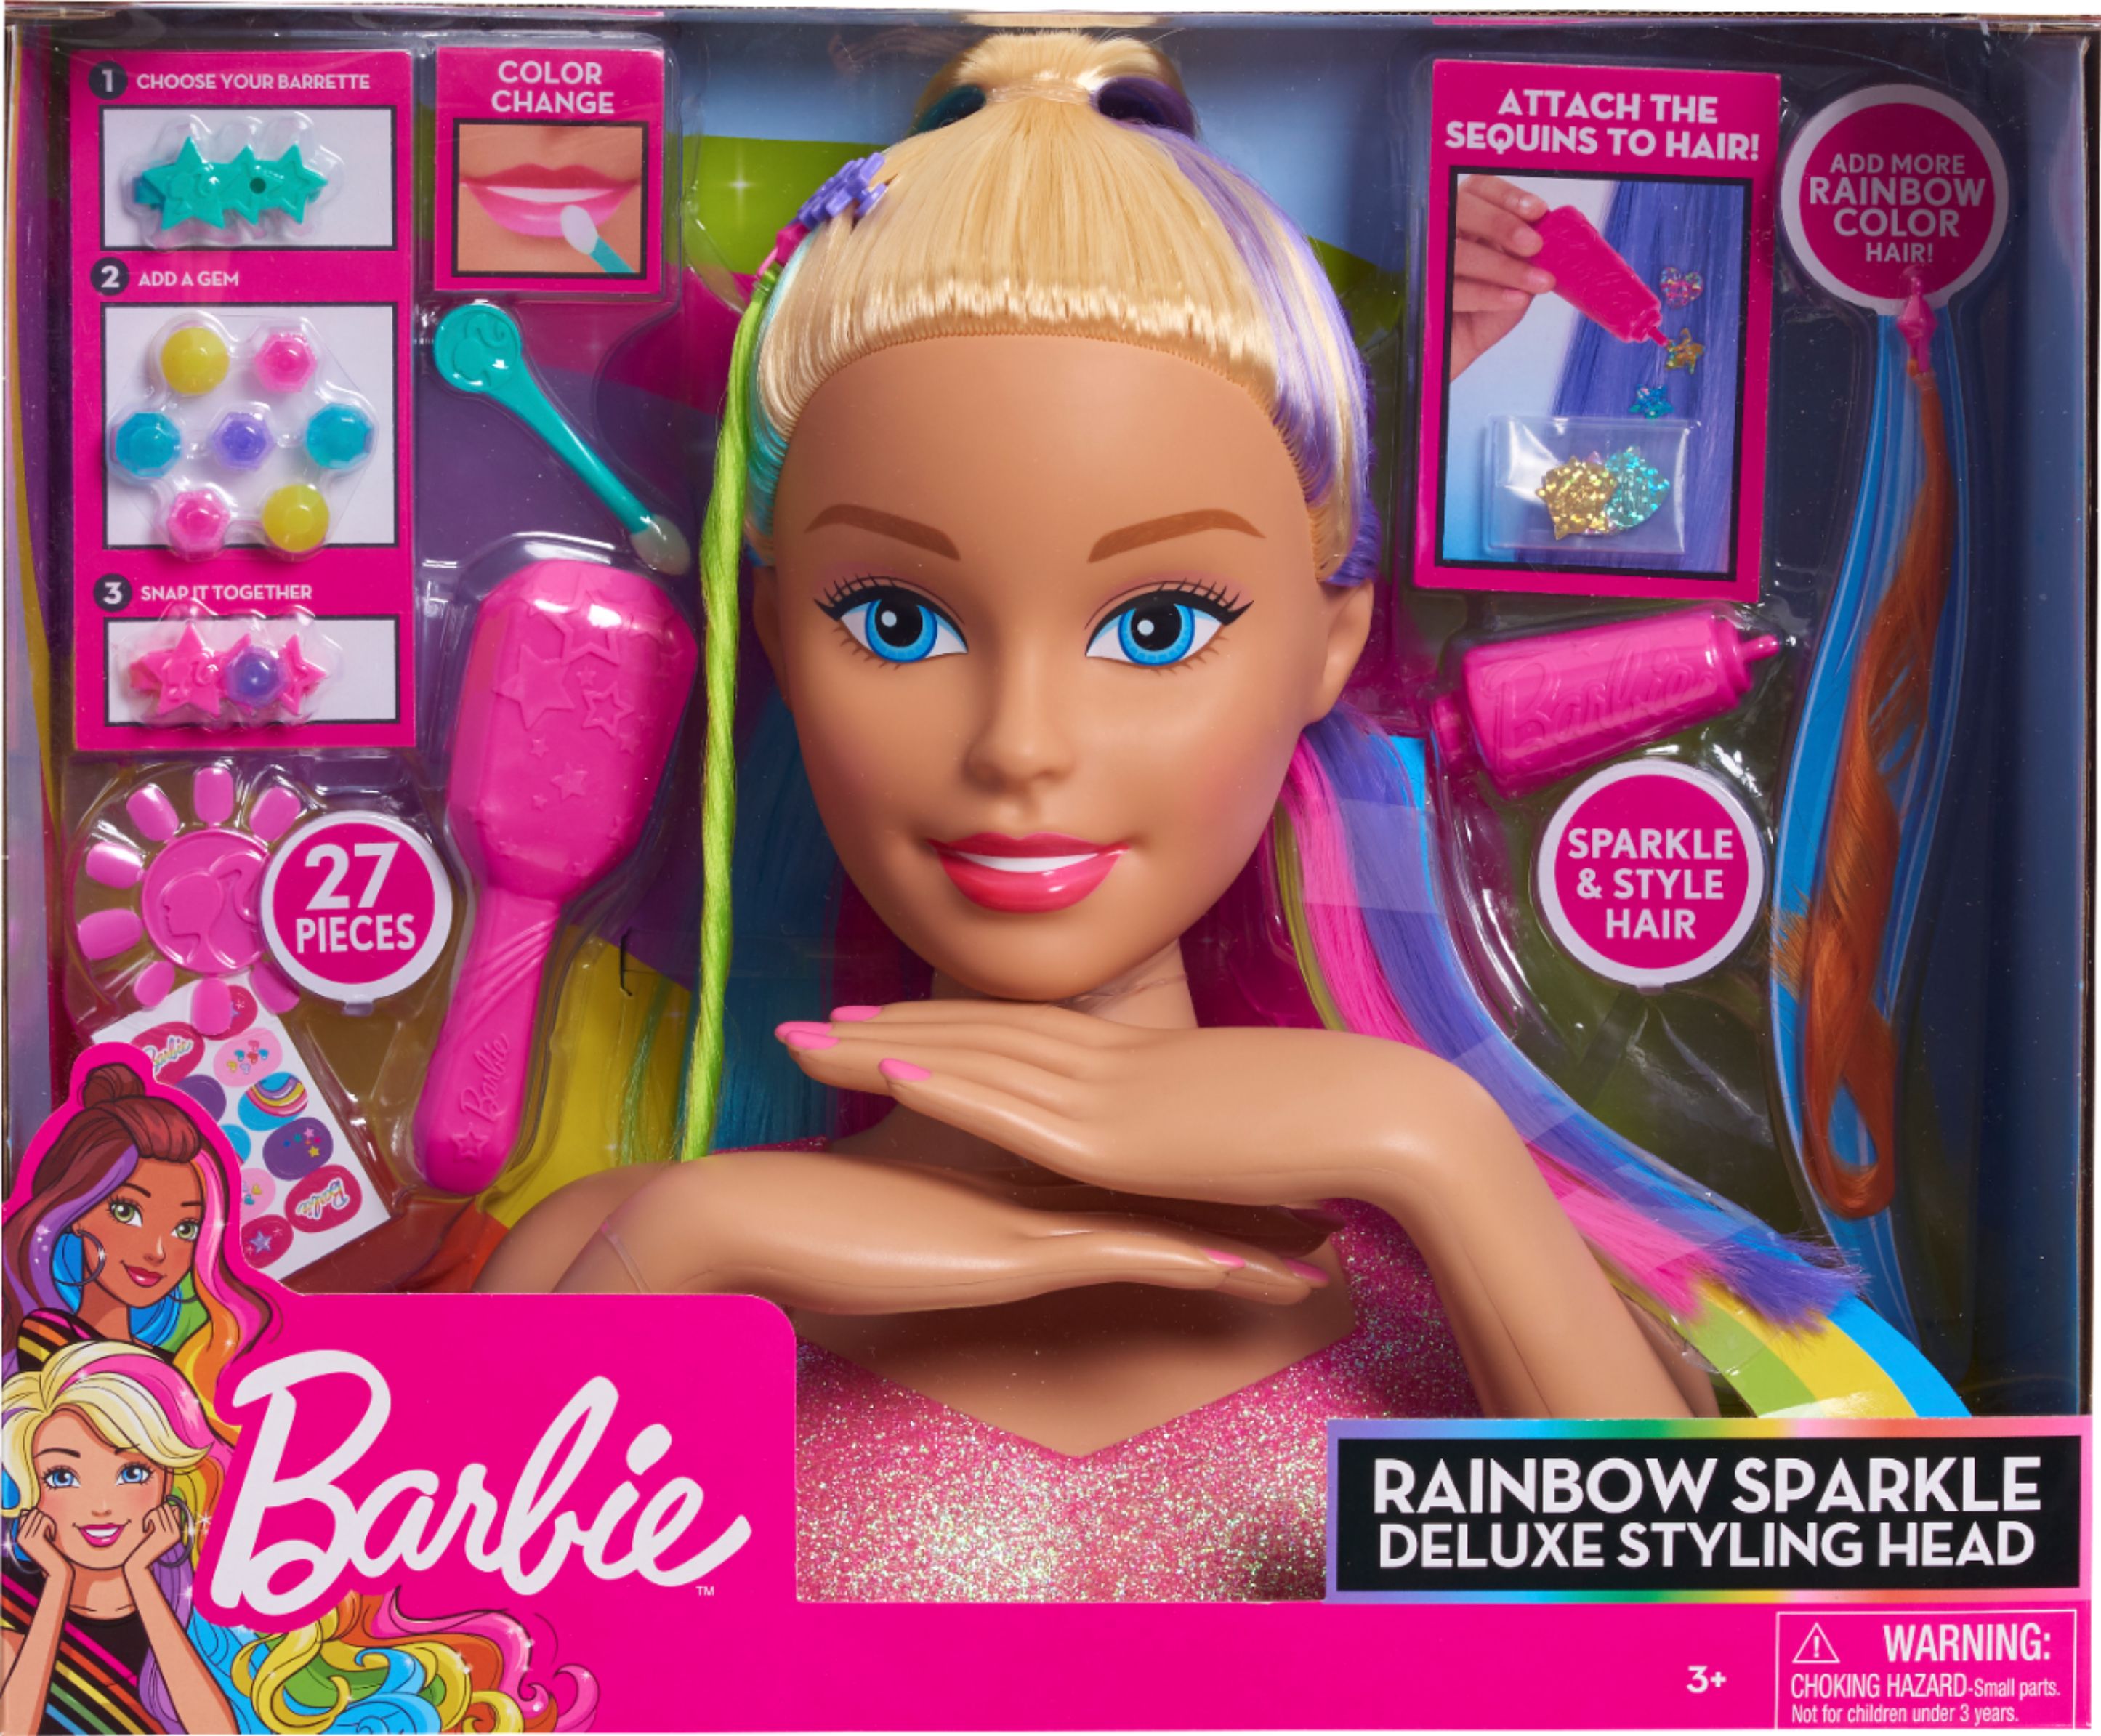 color and style barbie